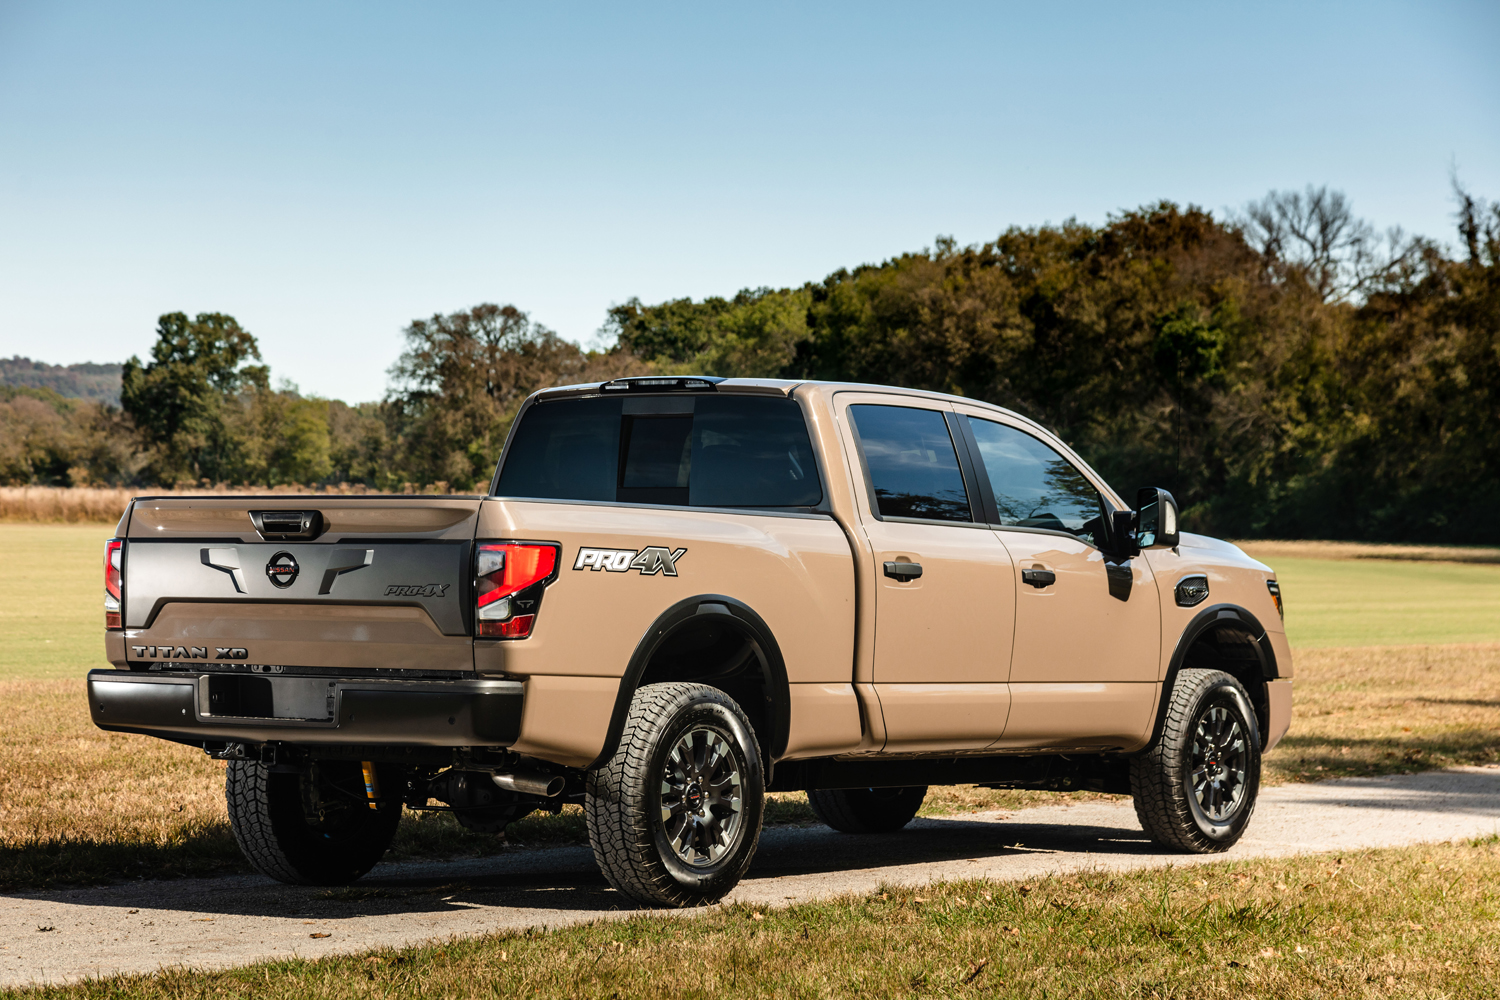 2020 nissan titan xd trim levels pricing and tech announced 4